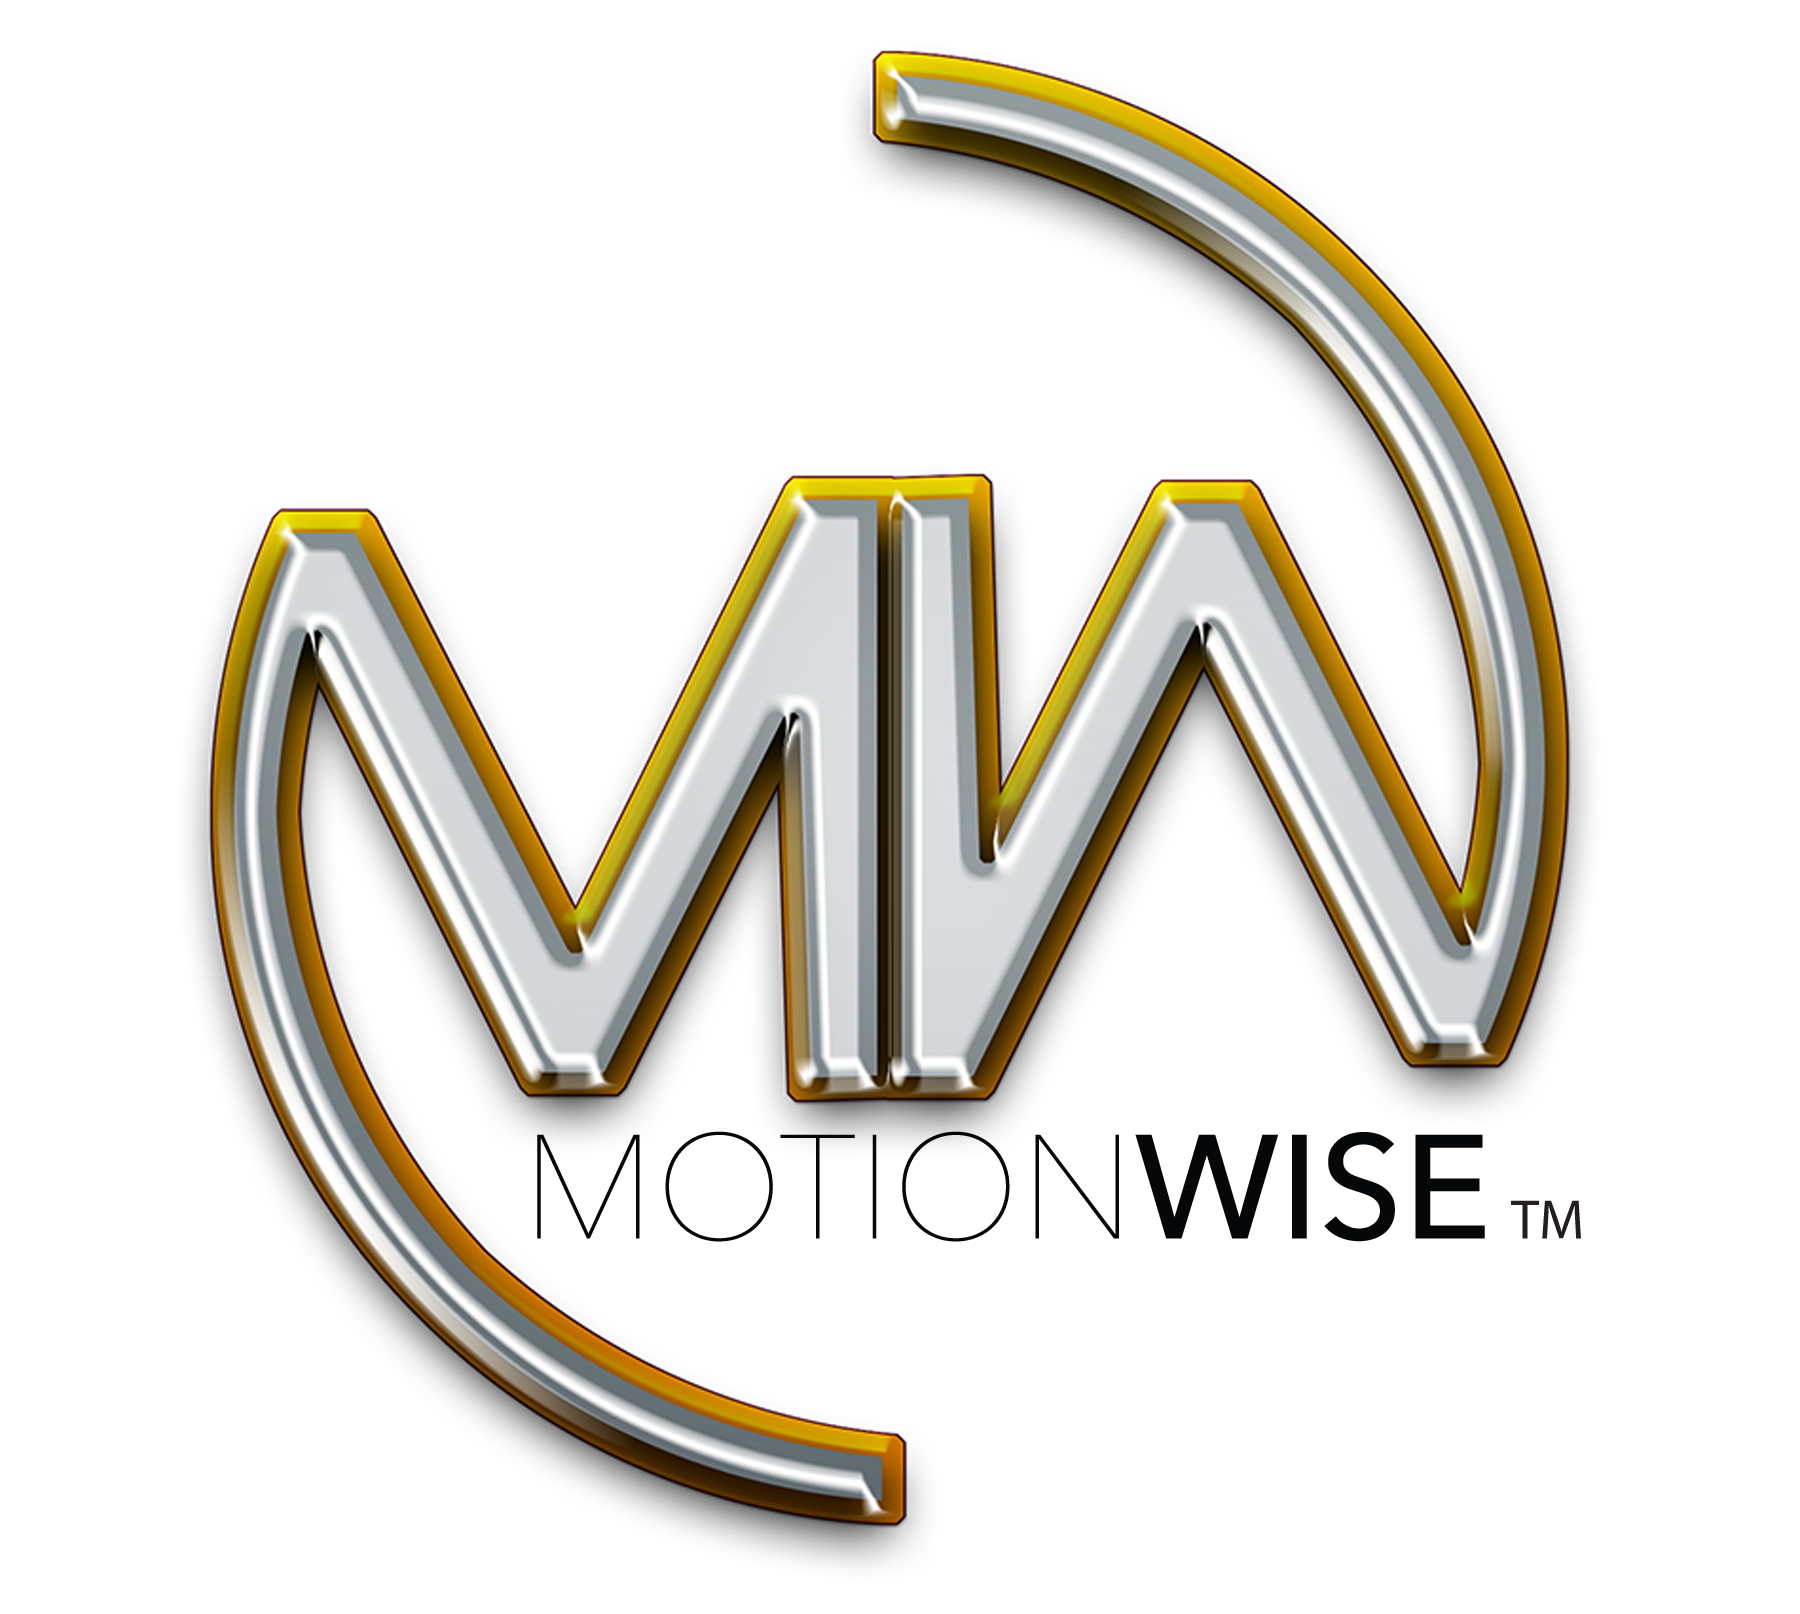 MOTION WISE